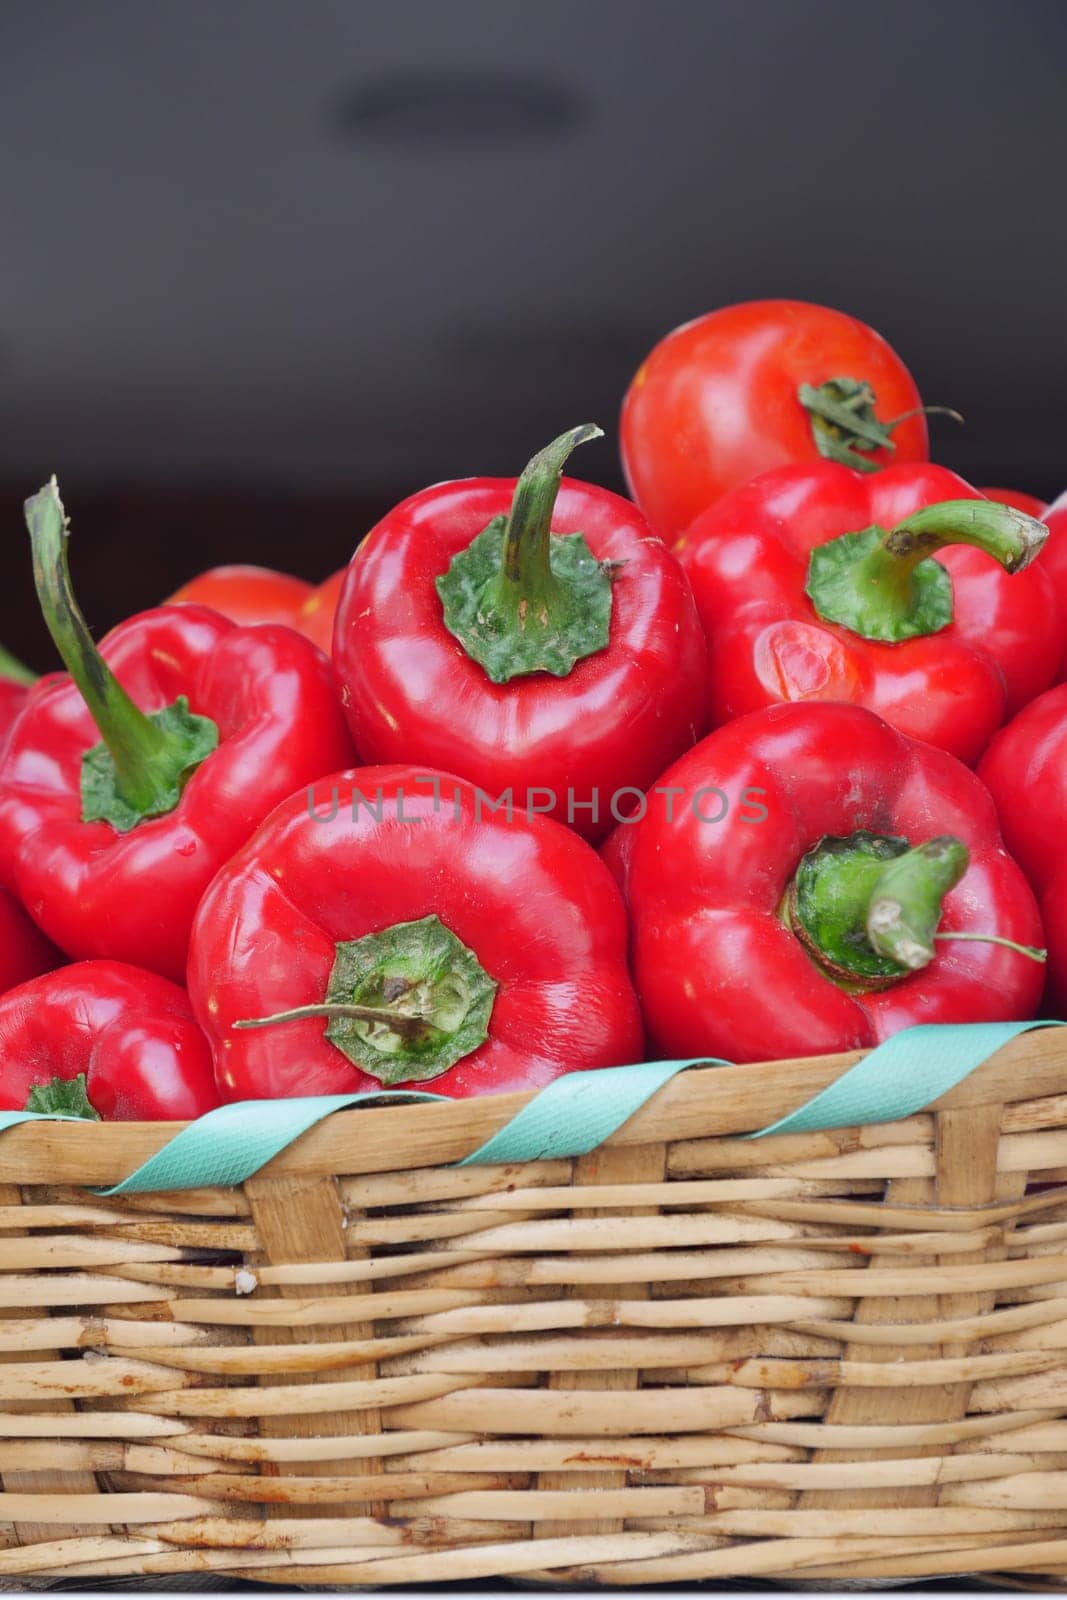 Wicker basket holds red bell peppers by towfiq007